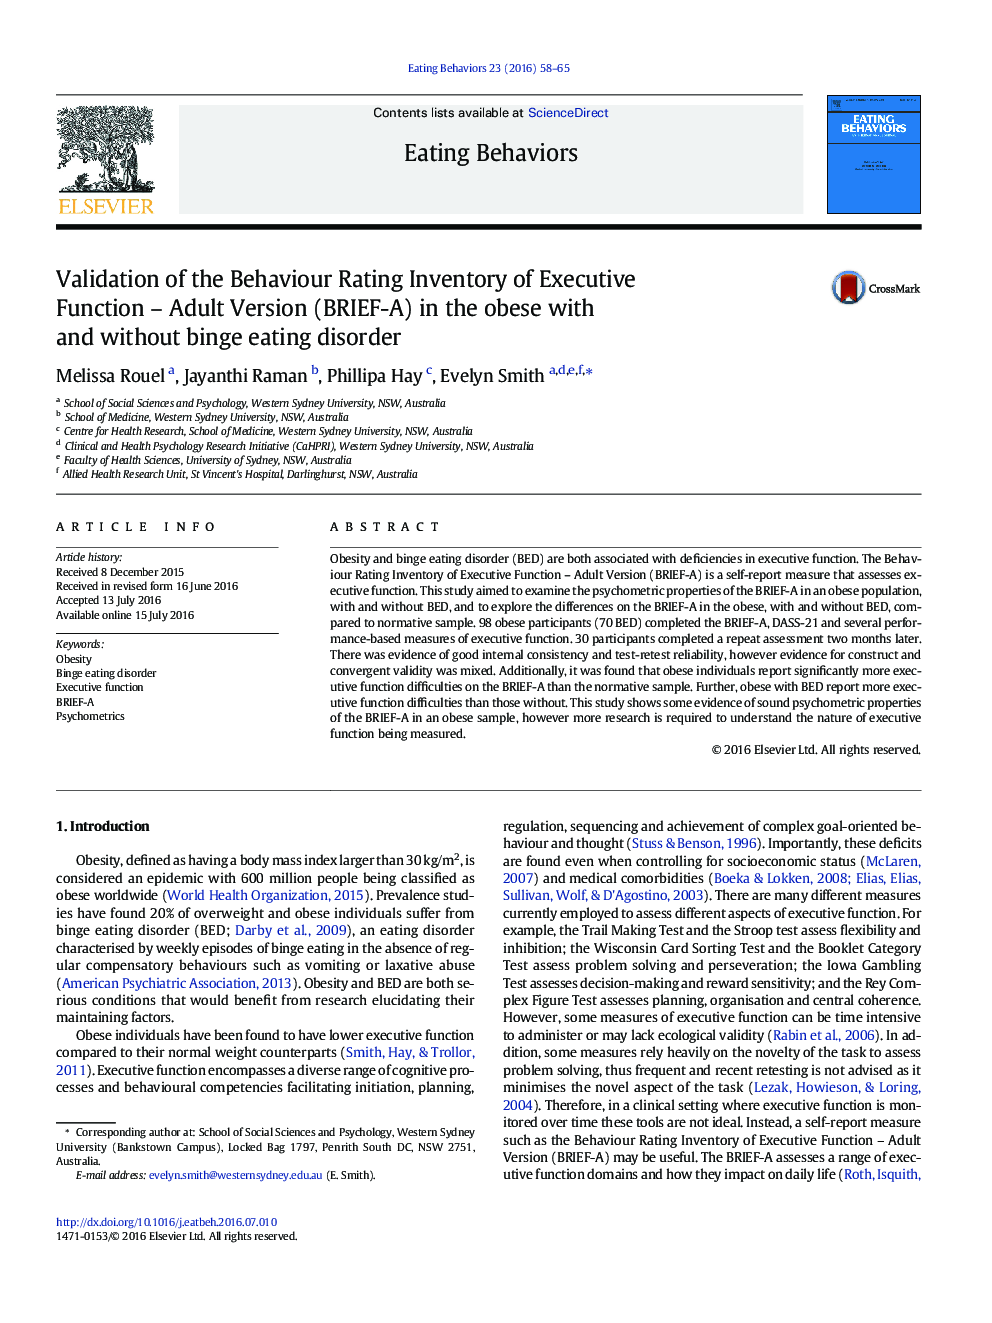 Validation of the Behaviour Rating Inventory of Executive Function – Adult Version (BRIEF-A) in the obese with and without binge eating disorder